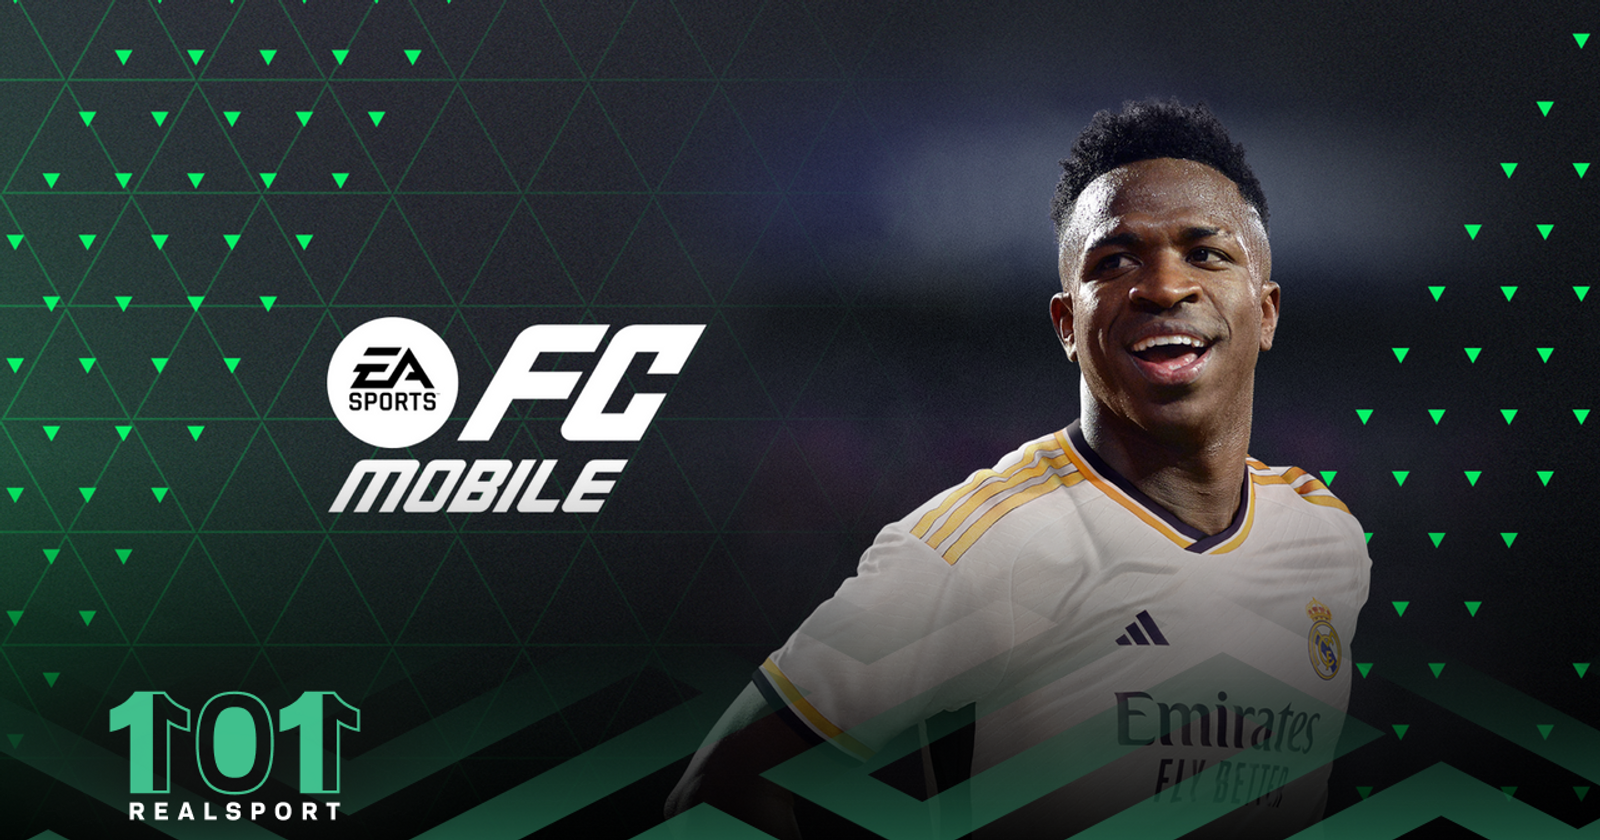 How to redeem the EA Sports FC Mobile FC Points card purchased